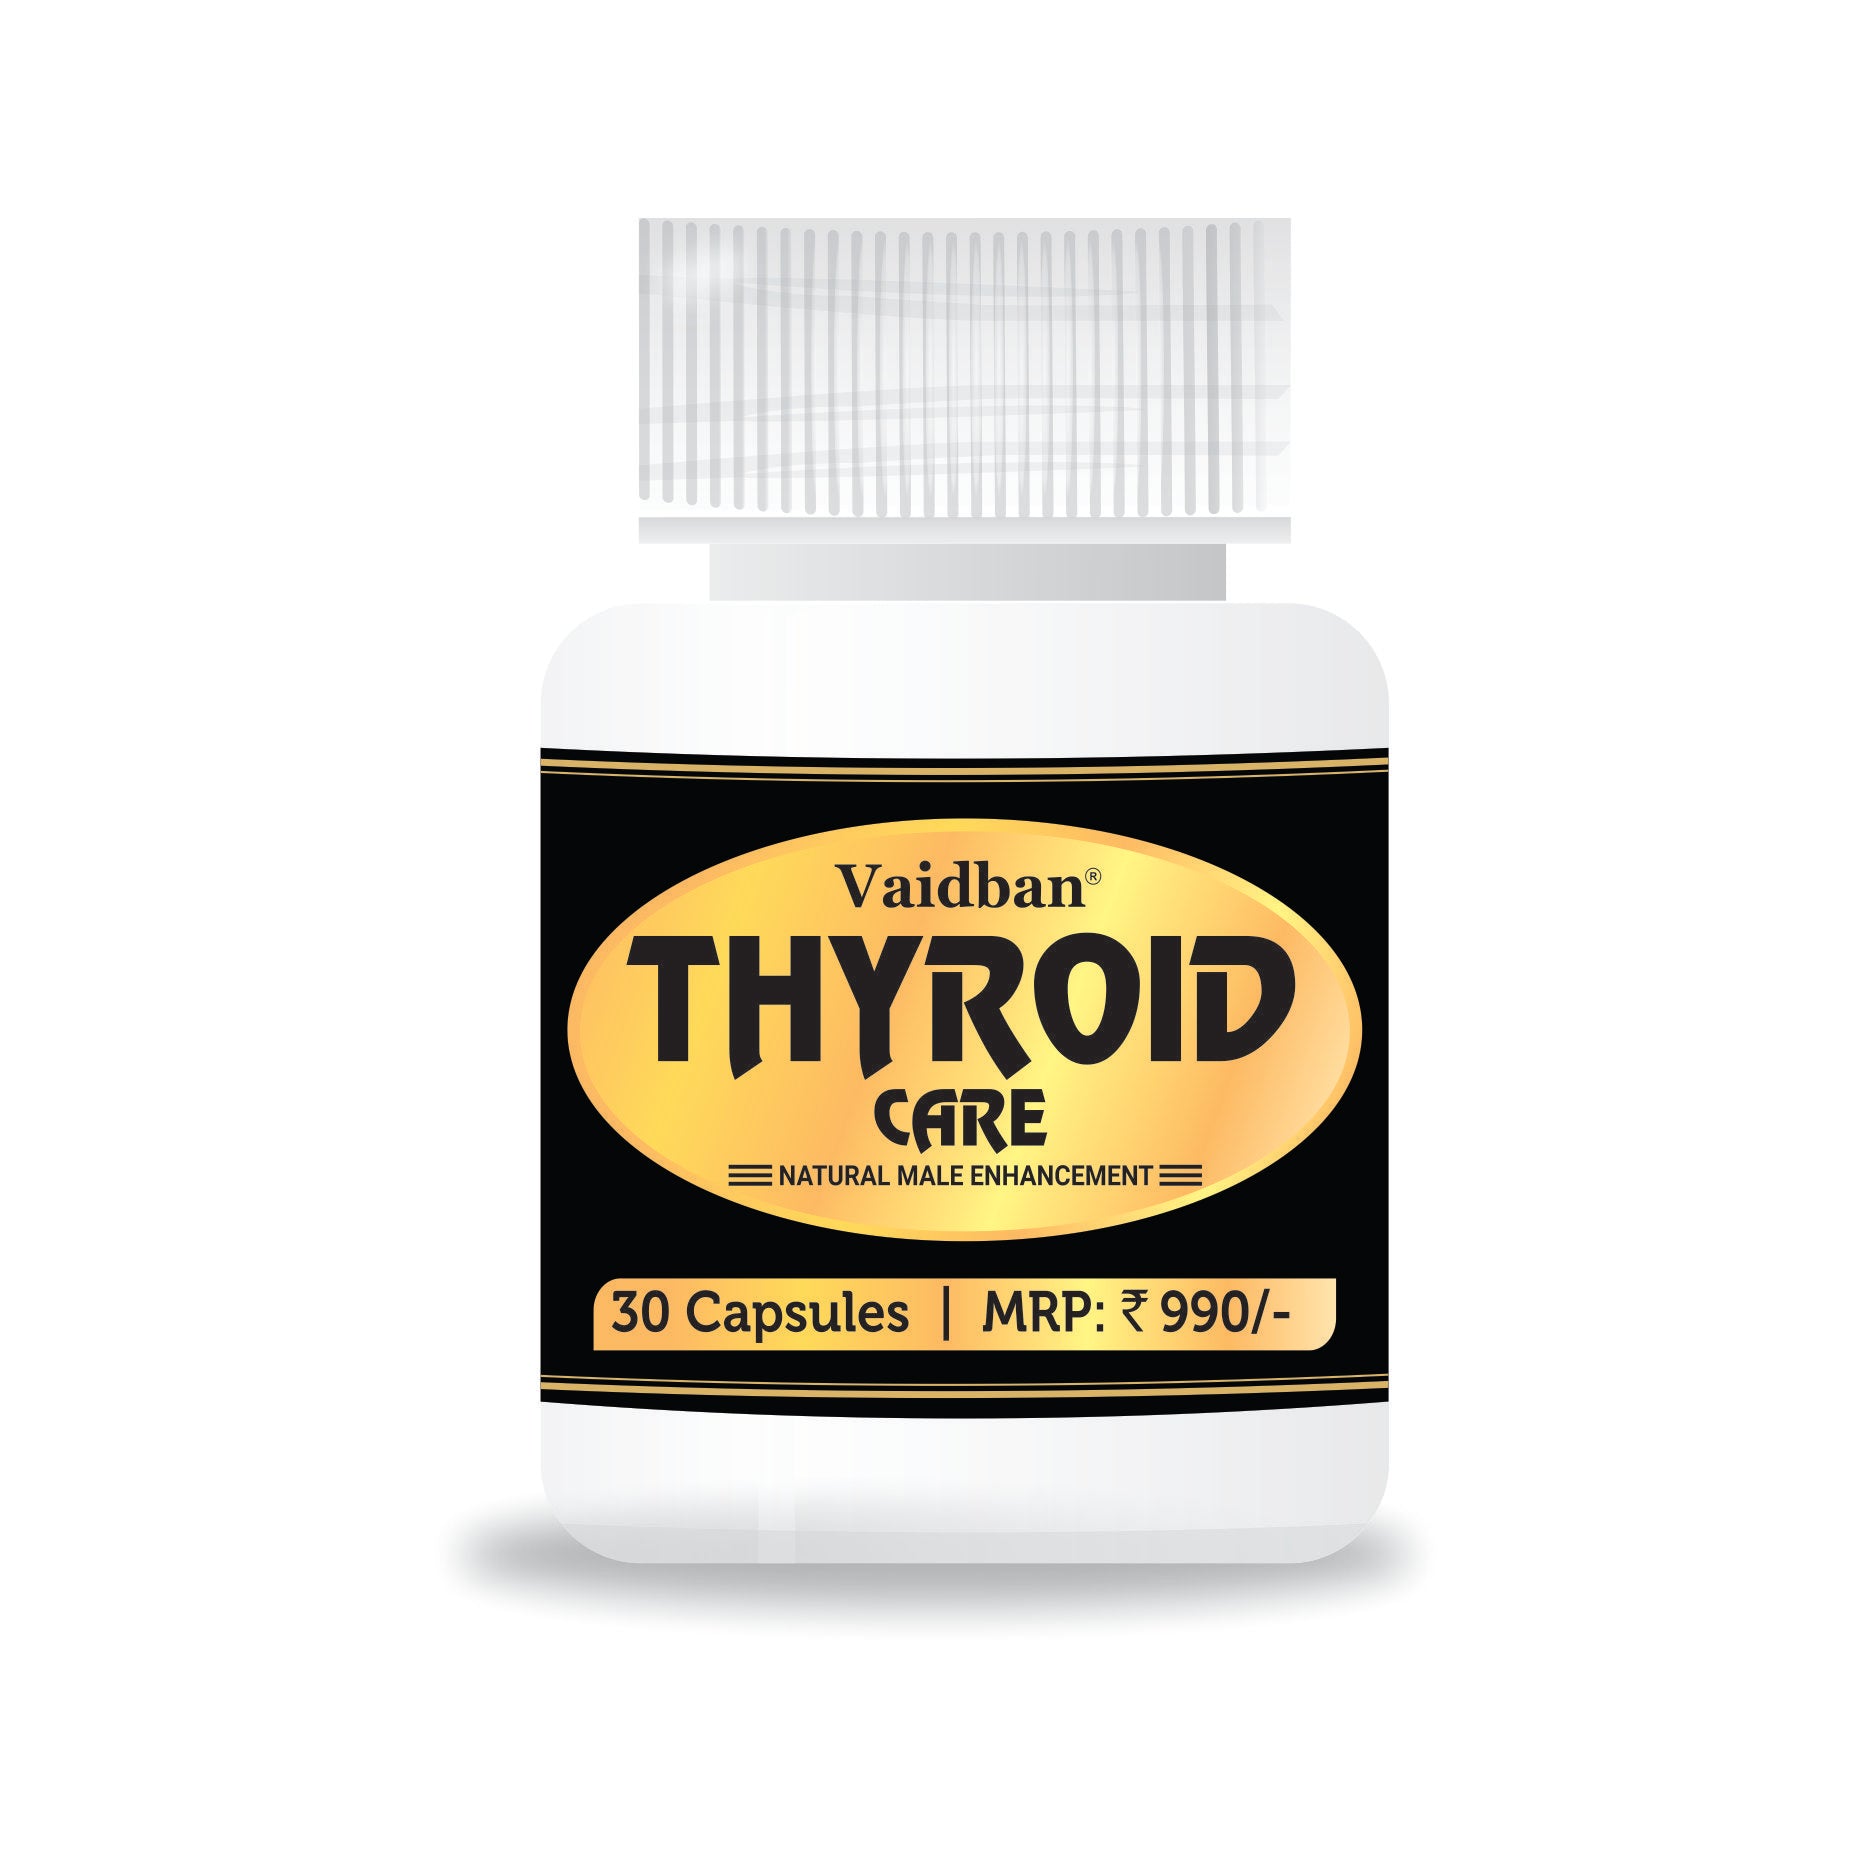 Vaidban Thyroid Care Capsules: Natural Support for Thyroid Function